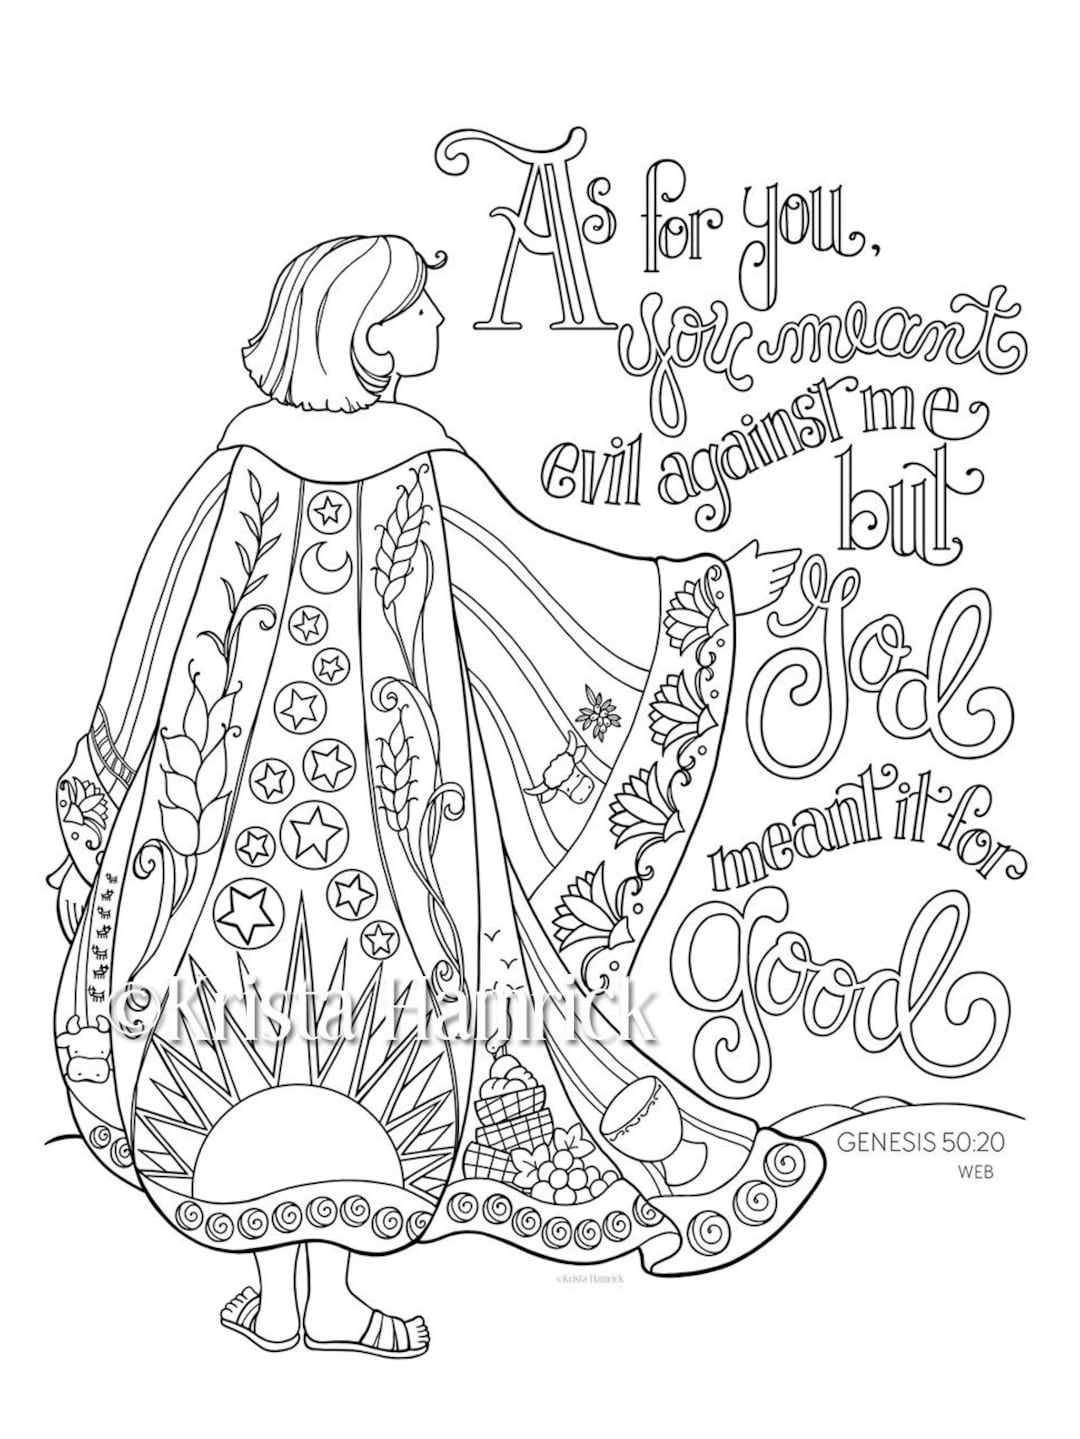 Josephs coat of many colors coloring page x bible journaling tip